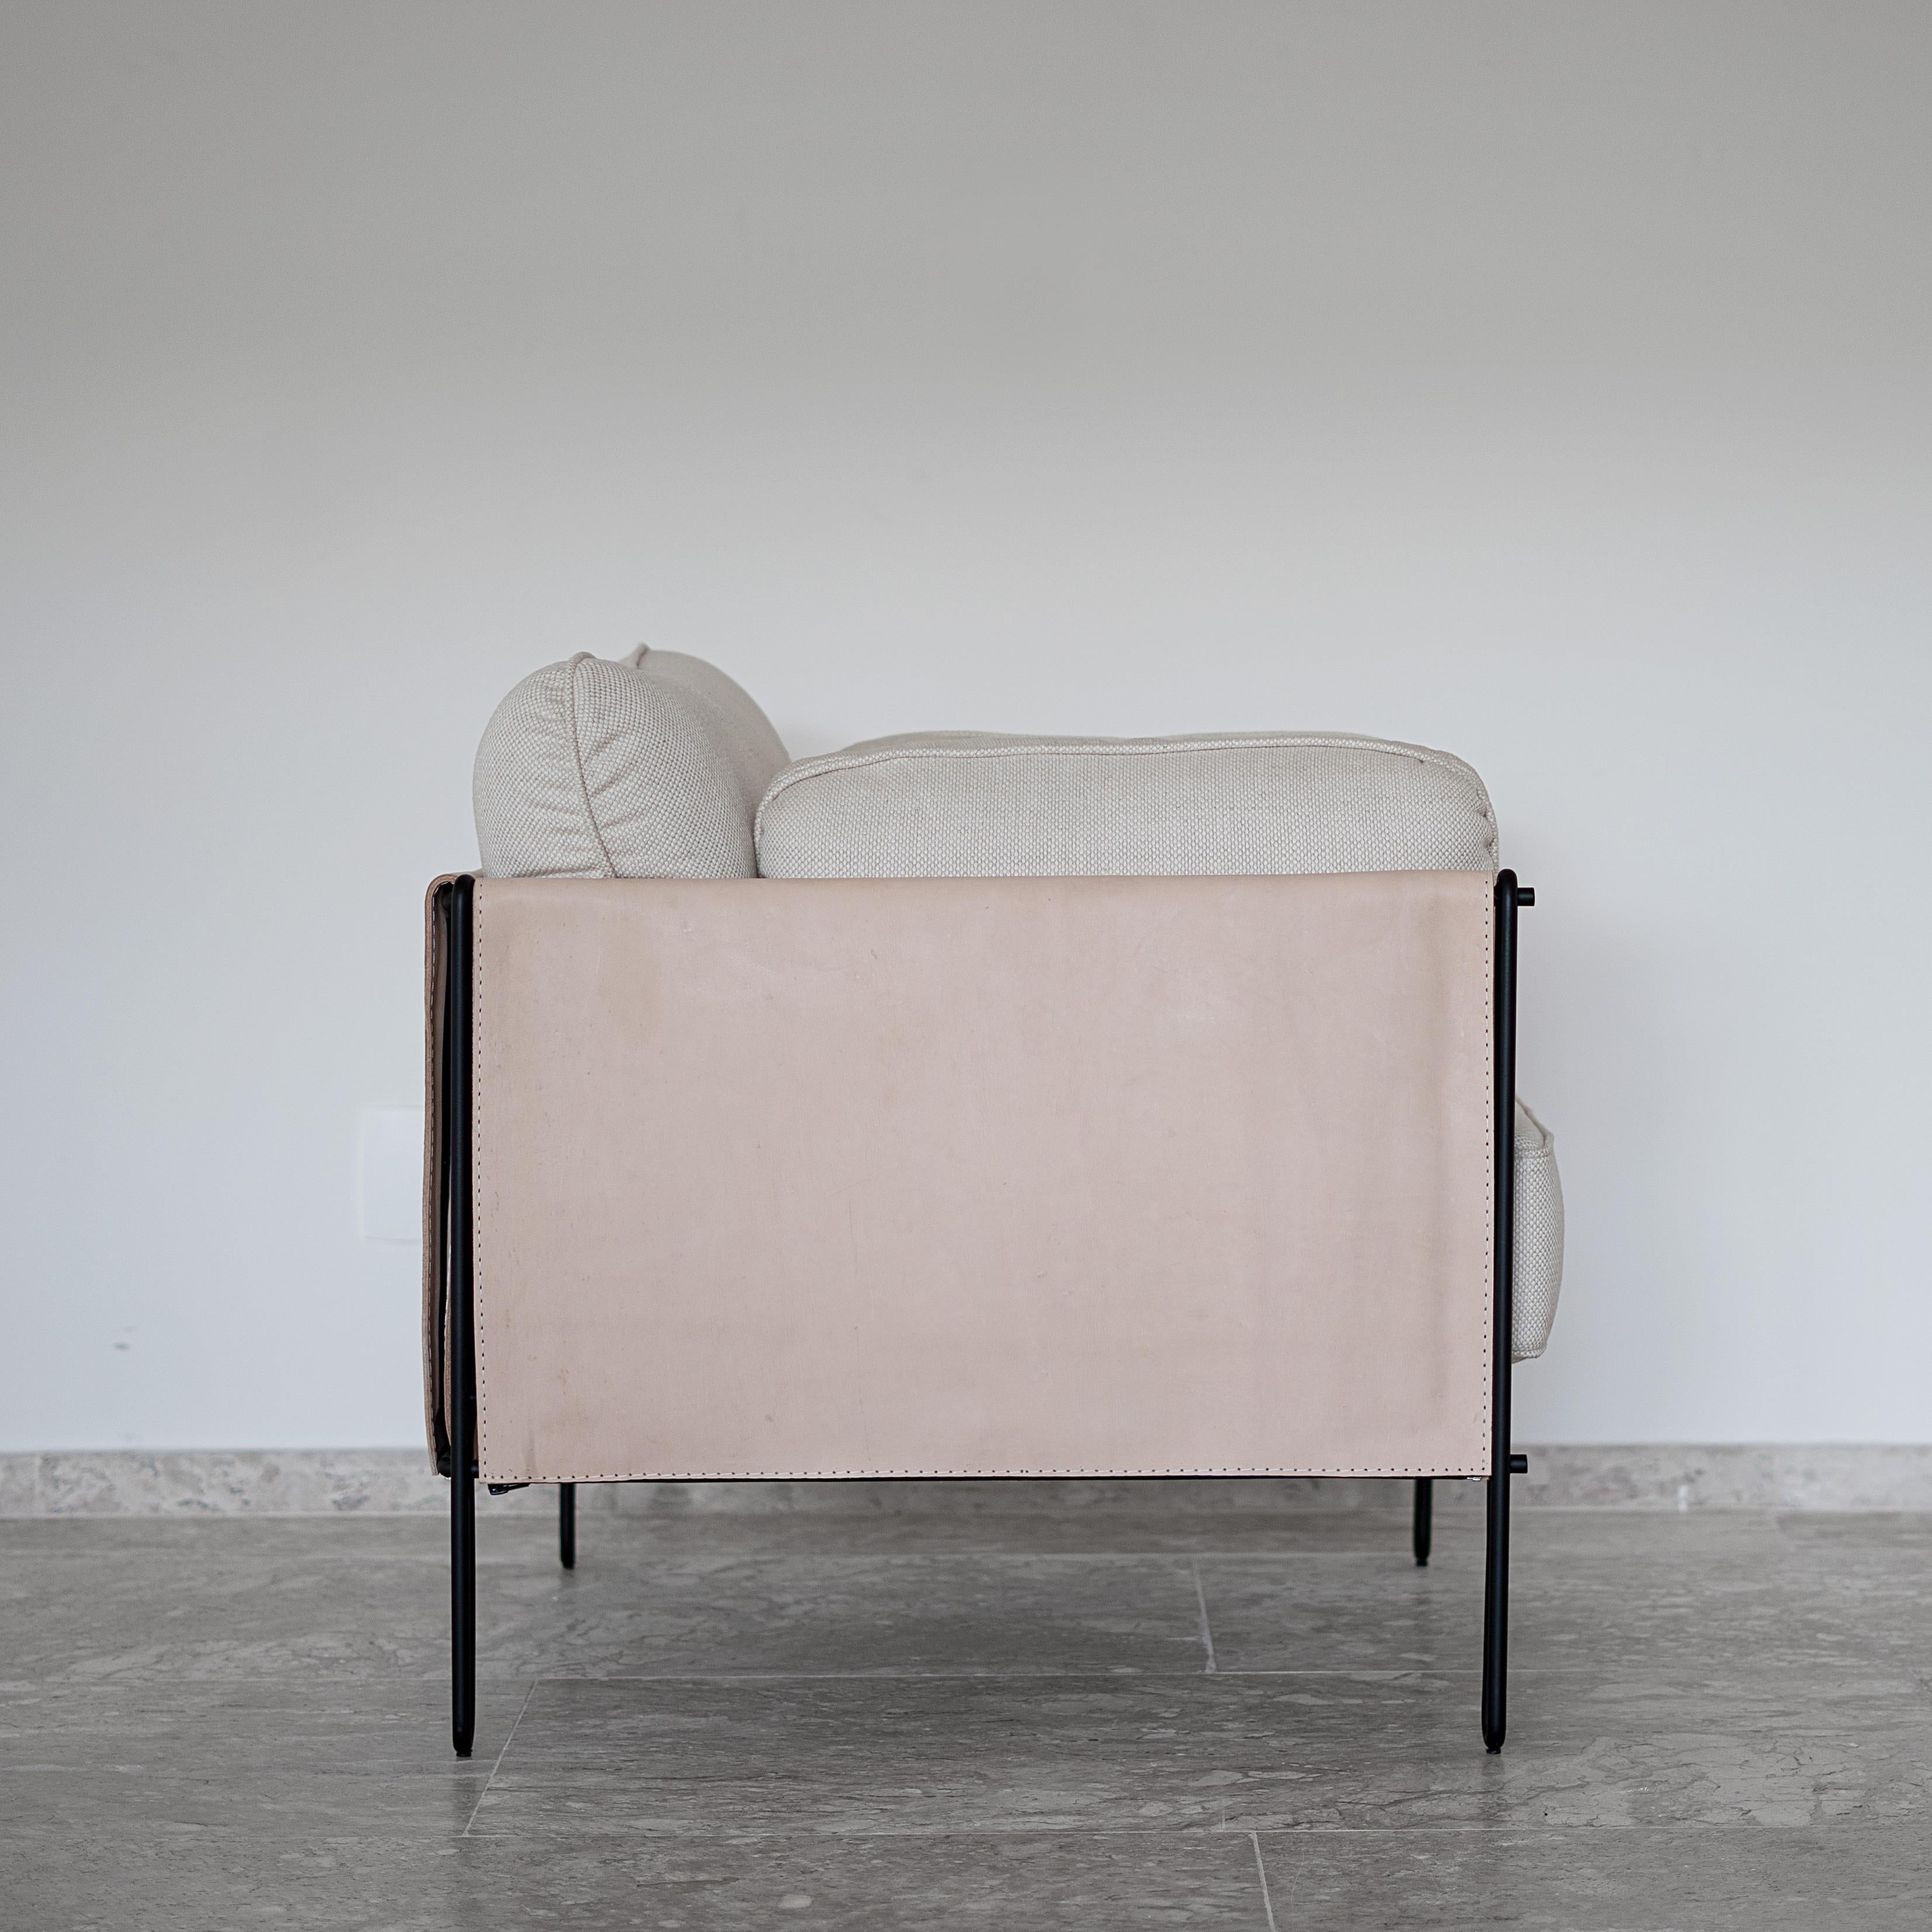 This award winning minimalist armchair in steel and leather is designed within a geometric and architetonic reasoning. Lightness is guaranteed by the delicate iron structure that gently rest the ground. The structure is lined with stout leather and